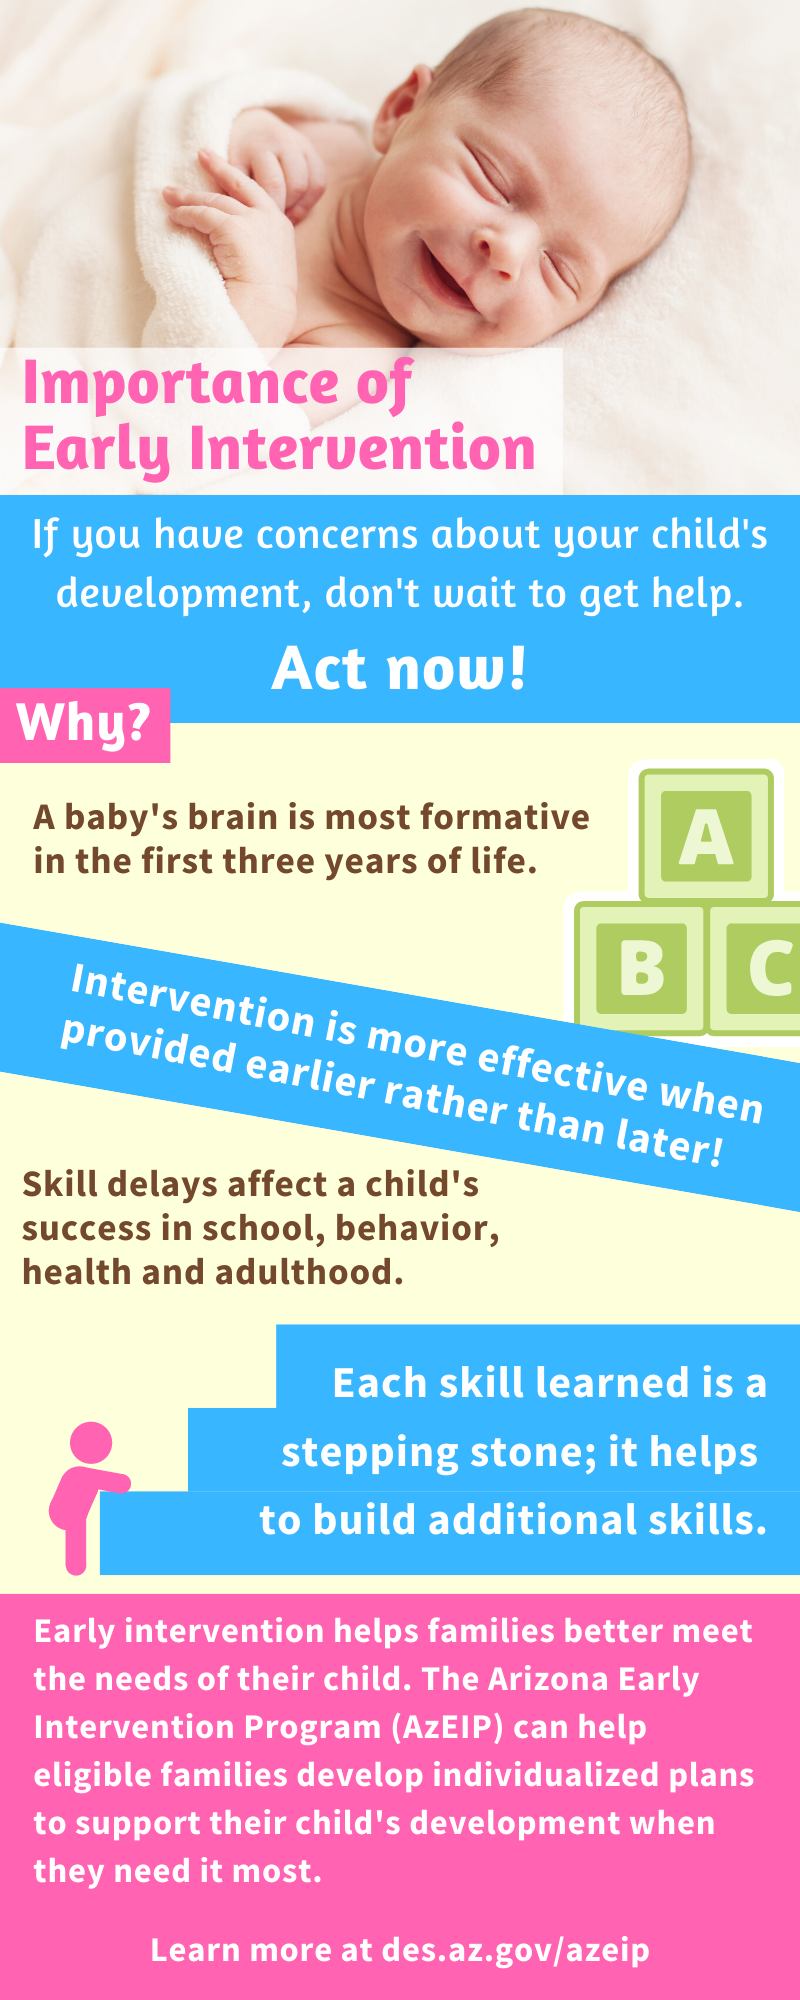 Facts and figures about early intervention